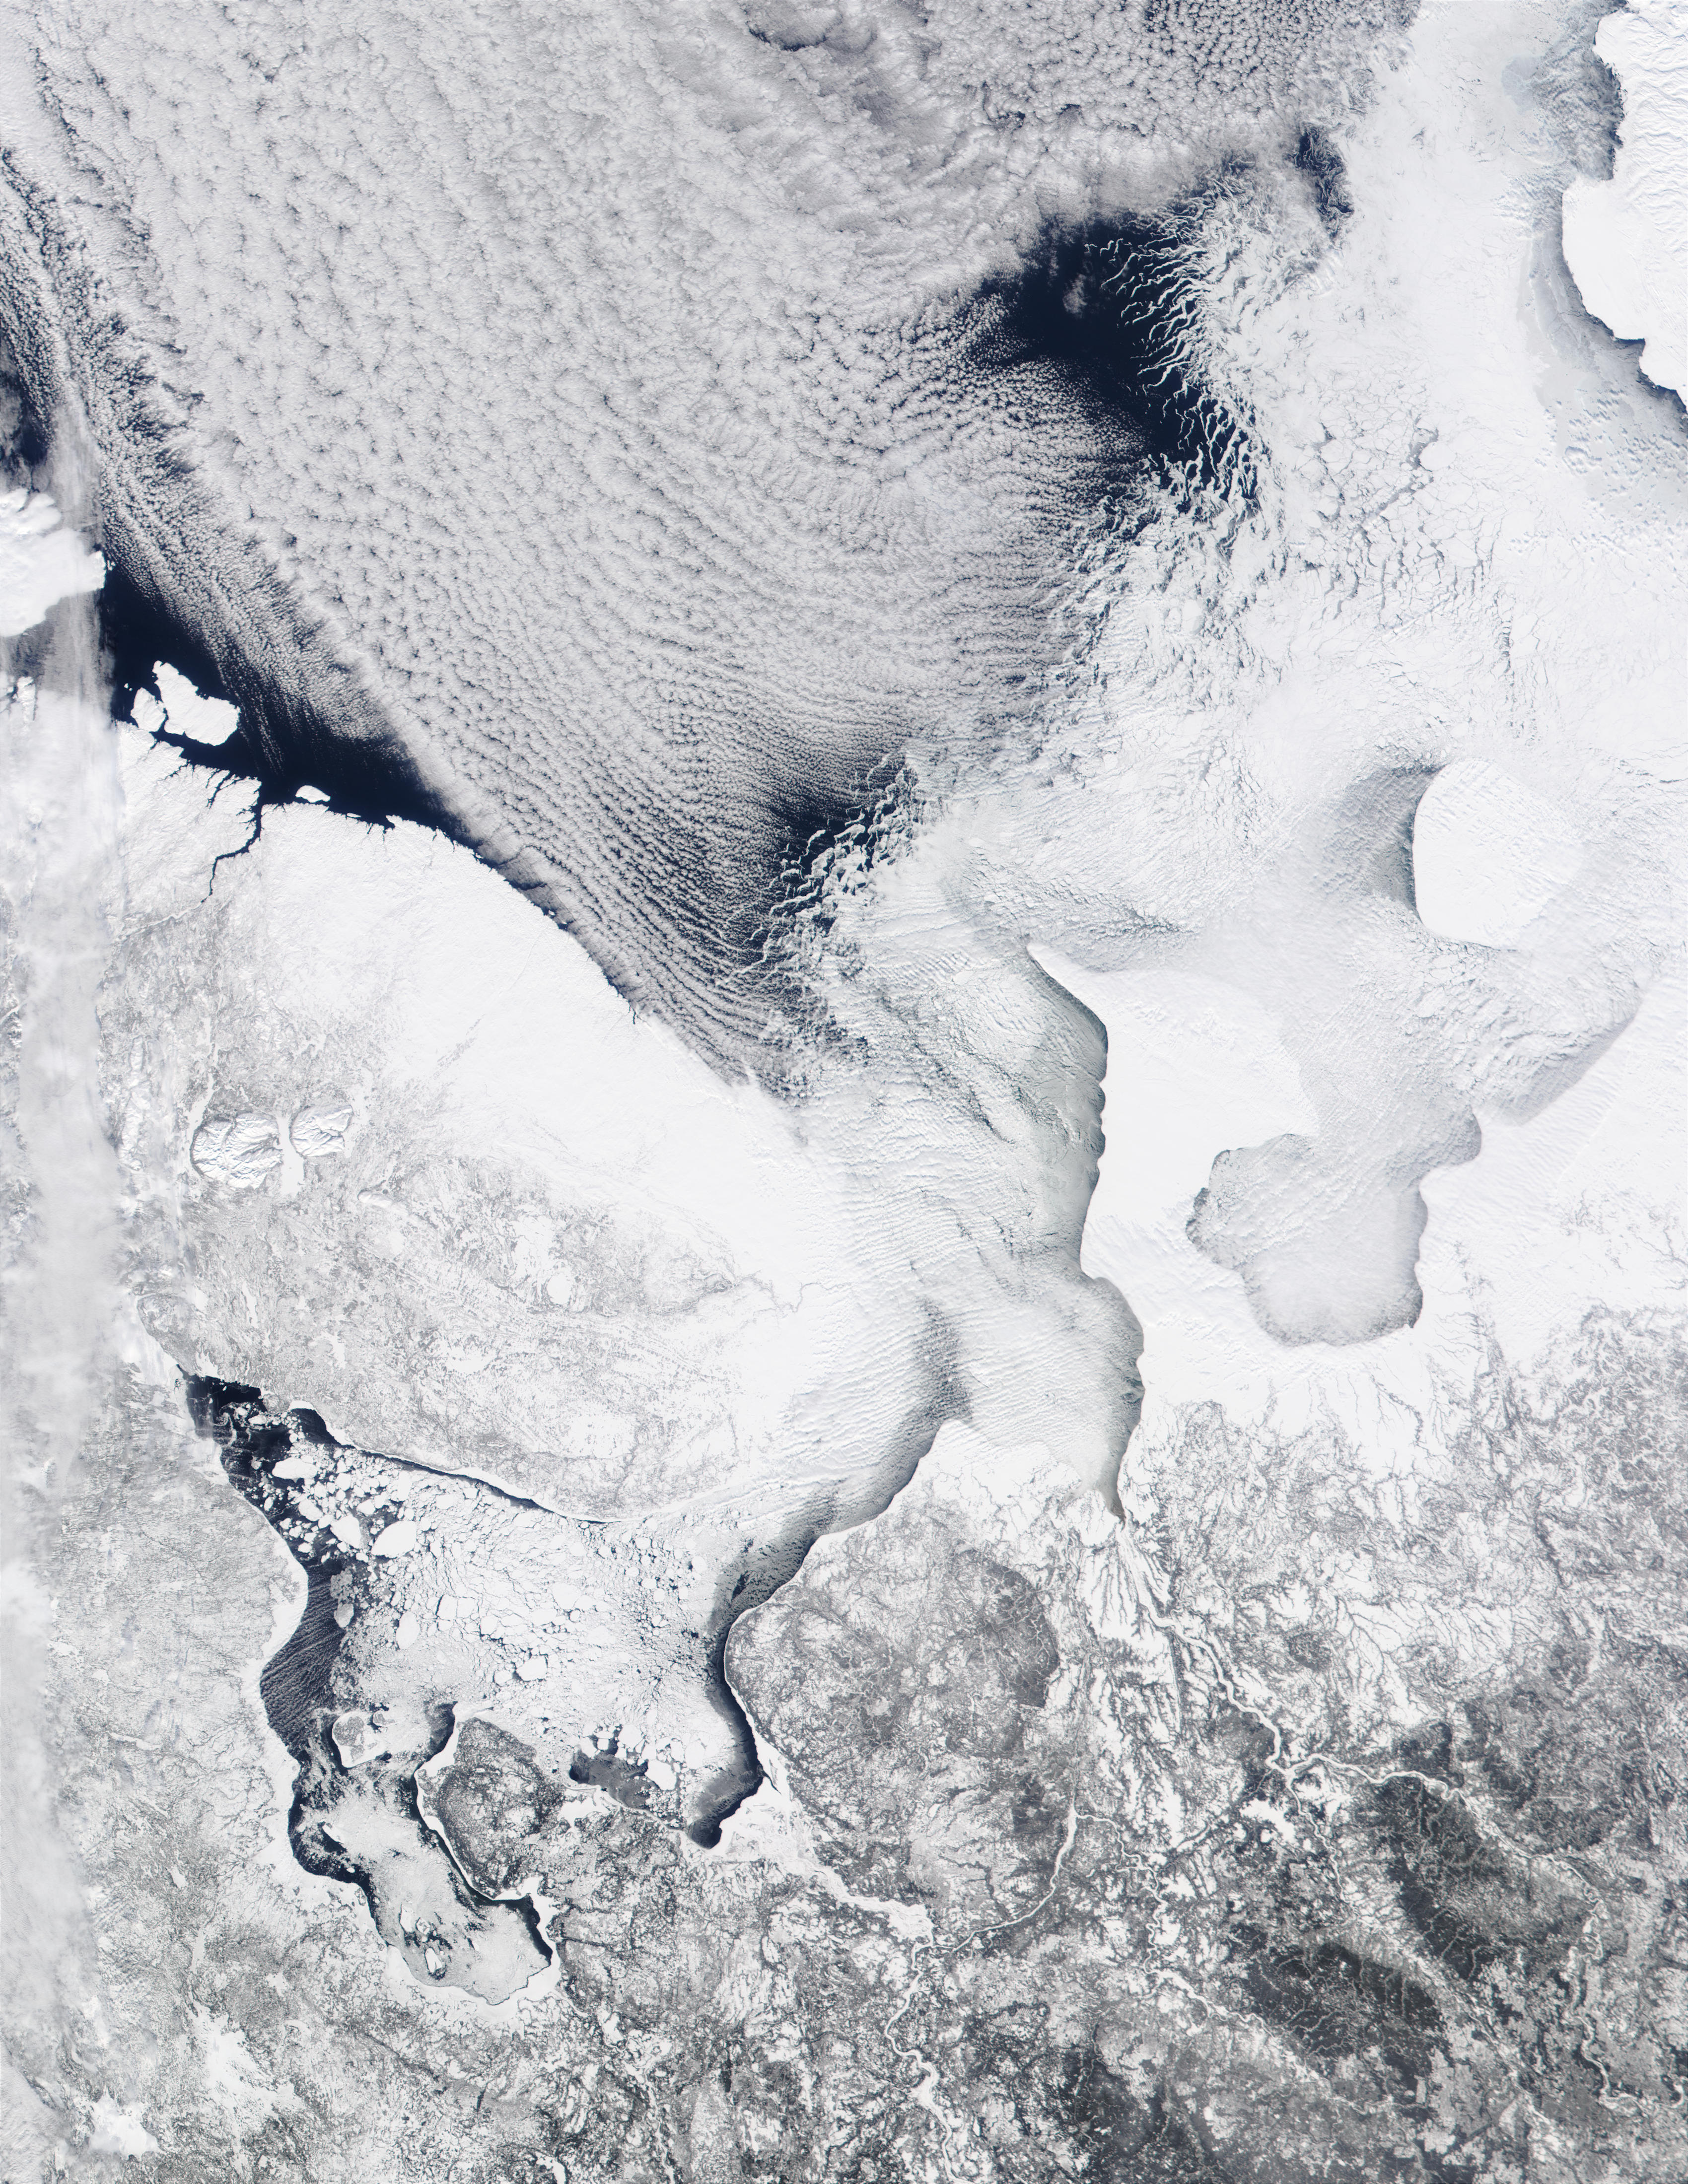 White Sea and Barents Sea, Russia - related image preview